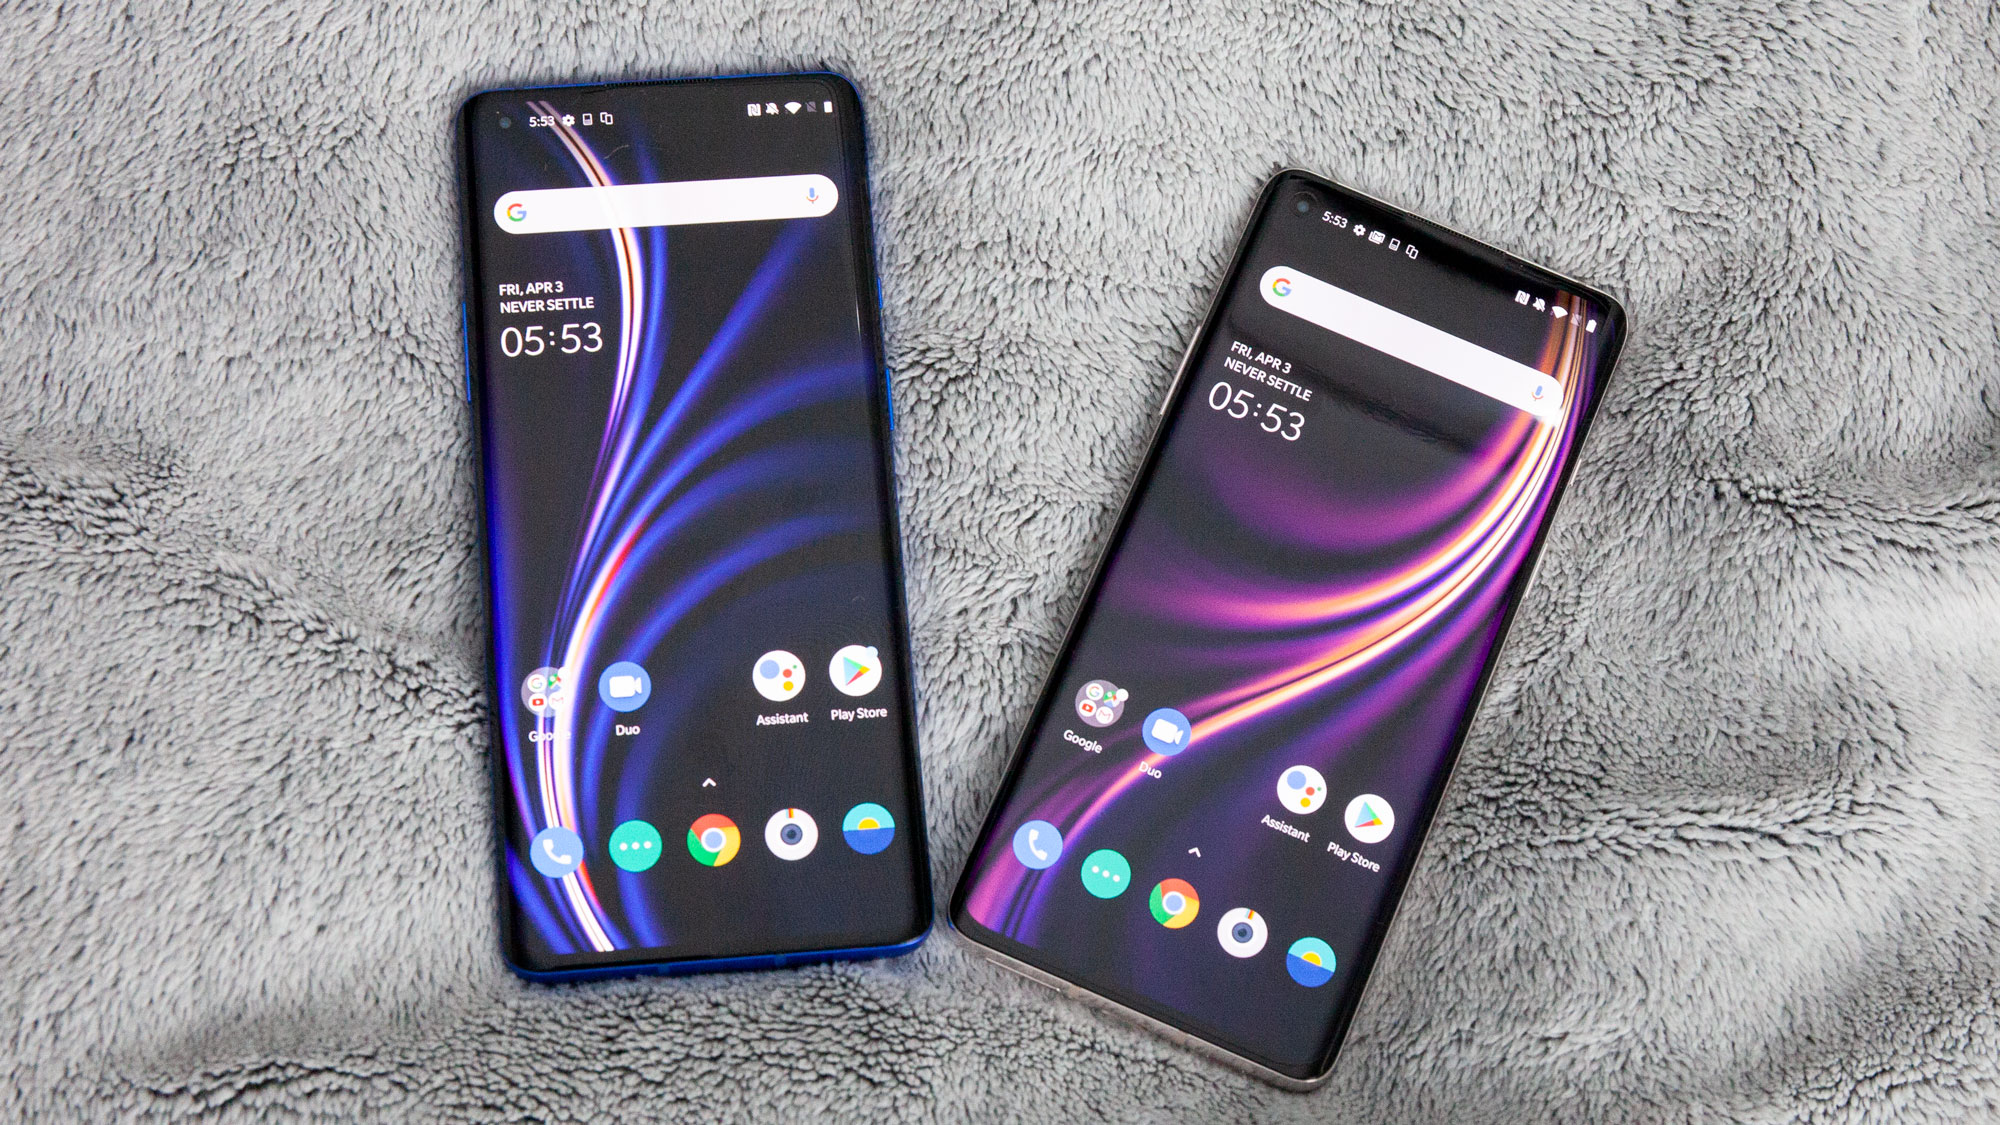 The best Smartphone worth buying in 2020